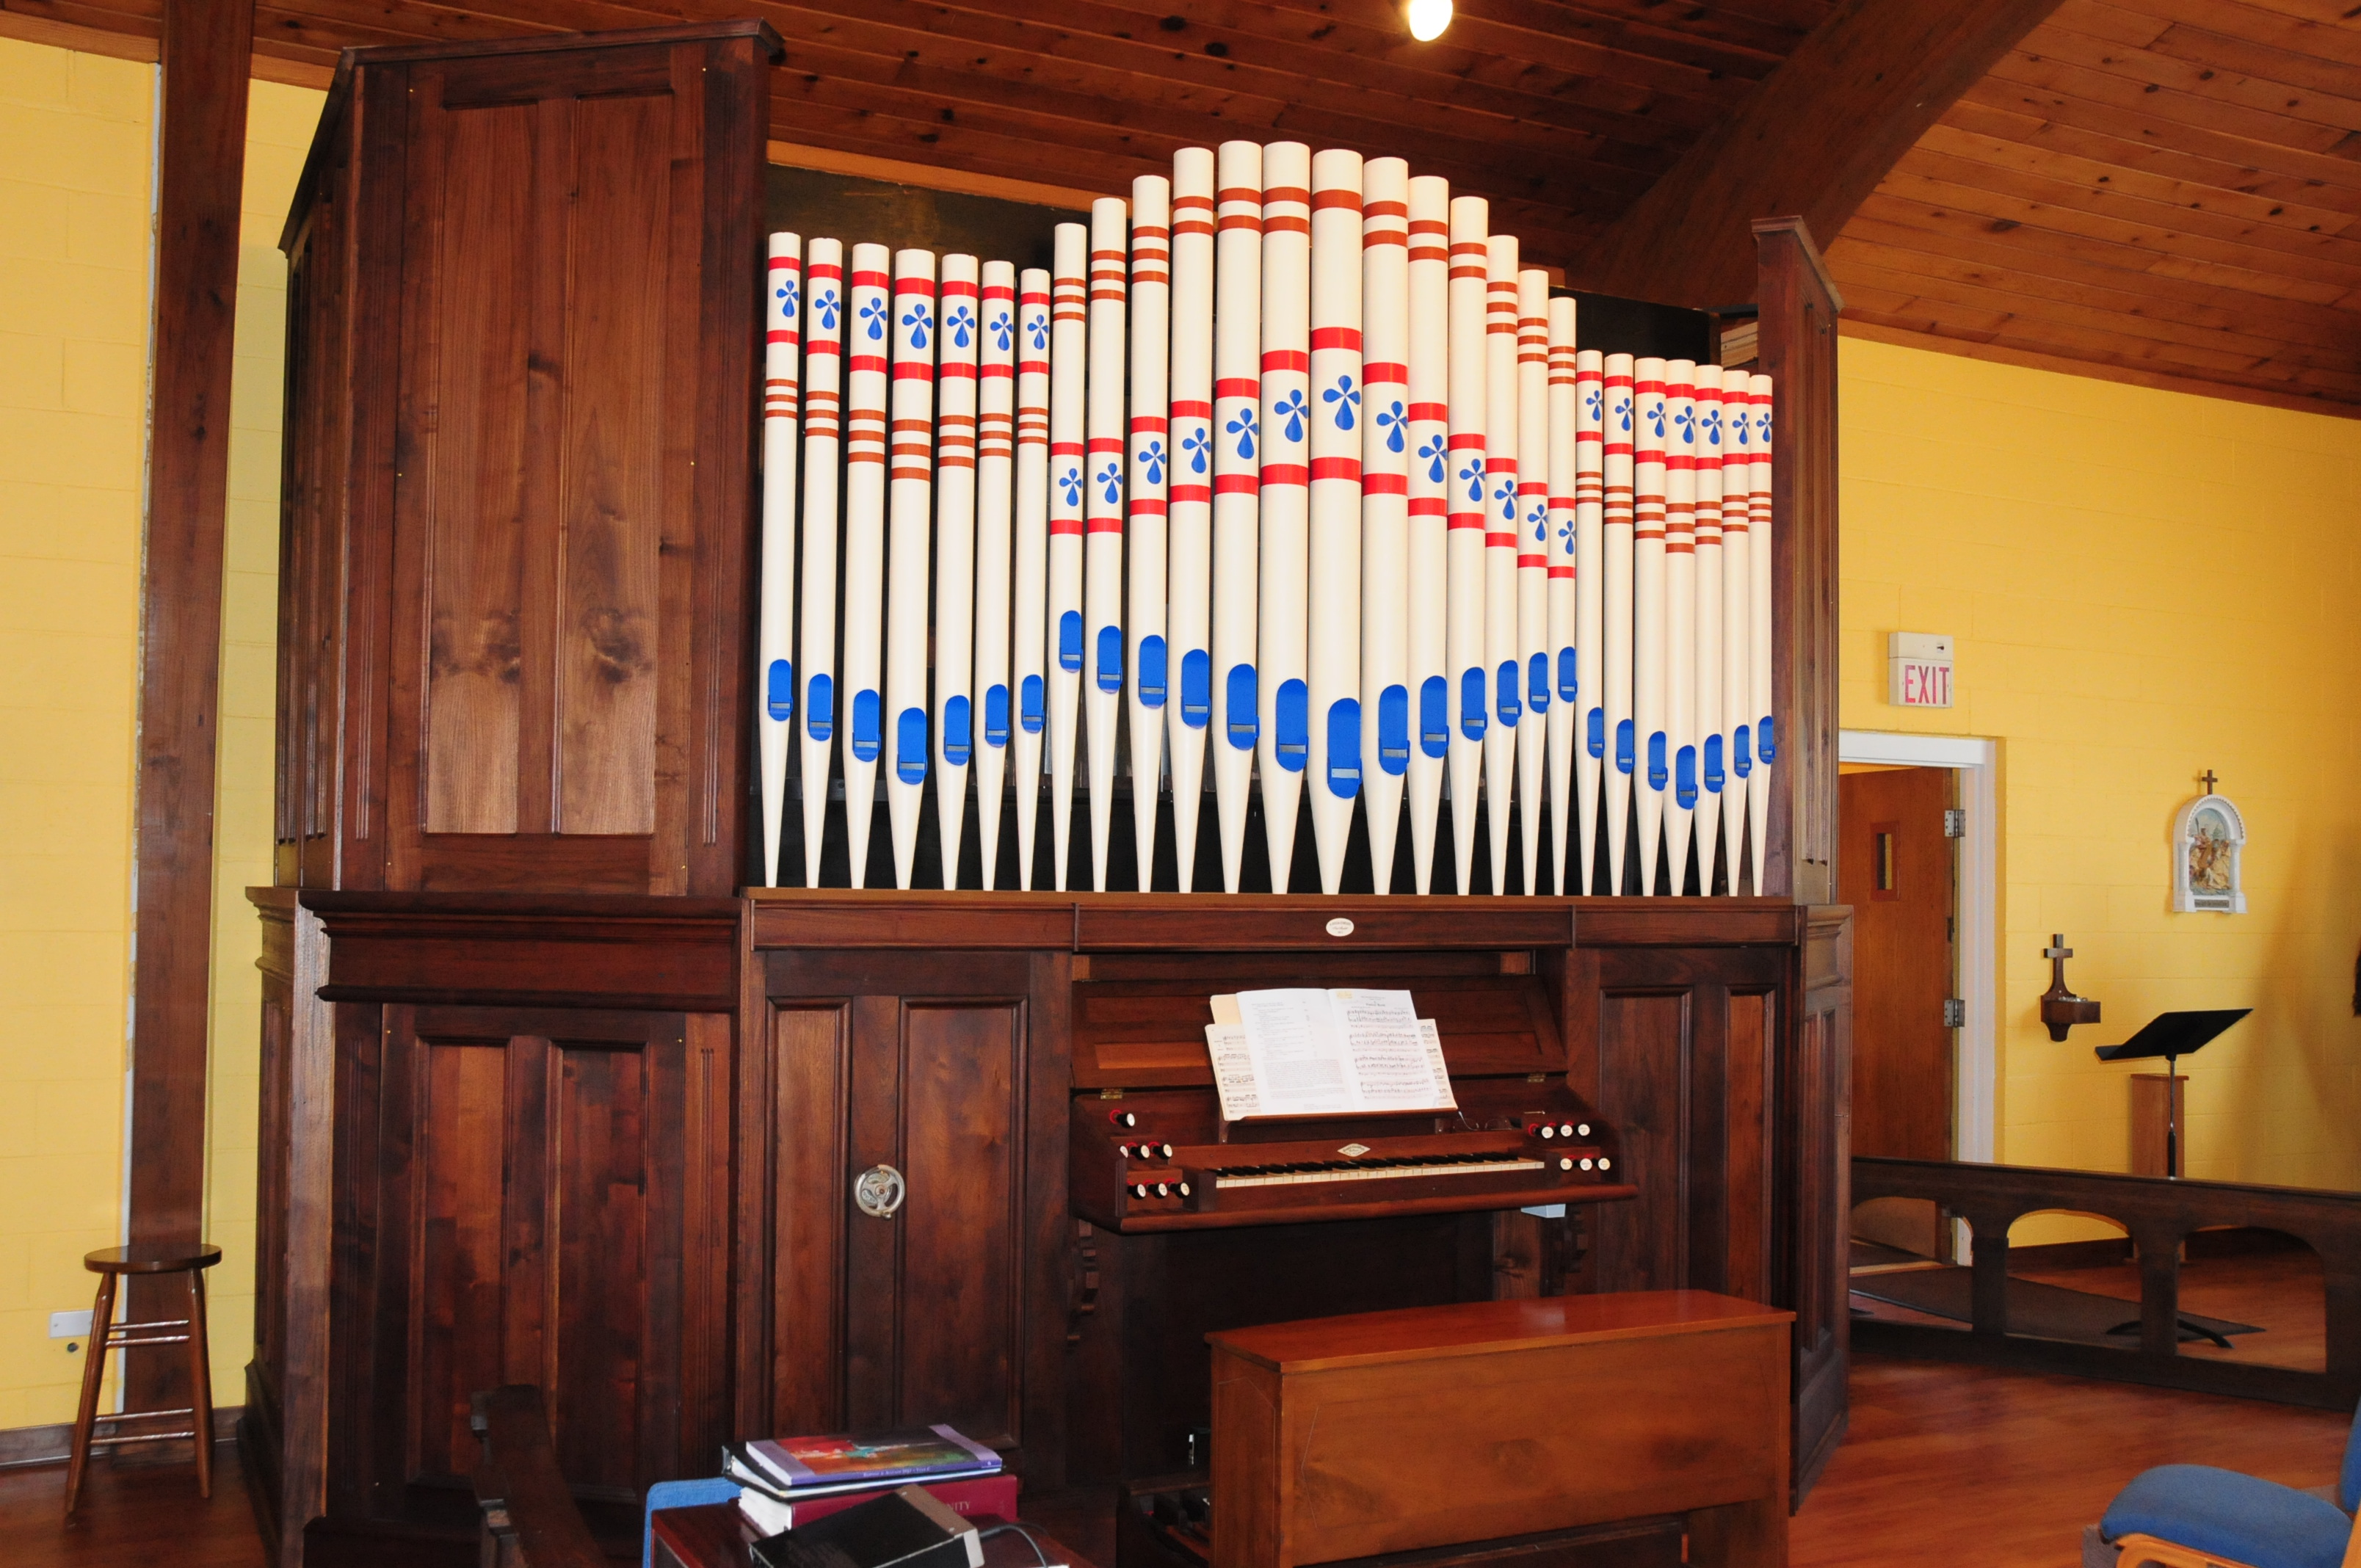 The Pomplitz organ was rebuilt by Brad Rule and the fascade is in the process of being painted by Luisa Martini, a recent graduate student. (Campbellsville University Photo by Drew Tucker)